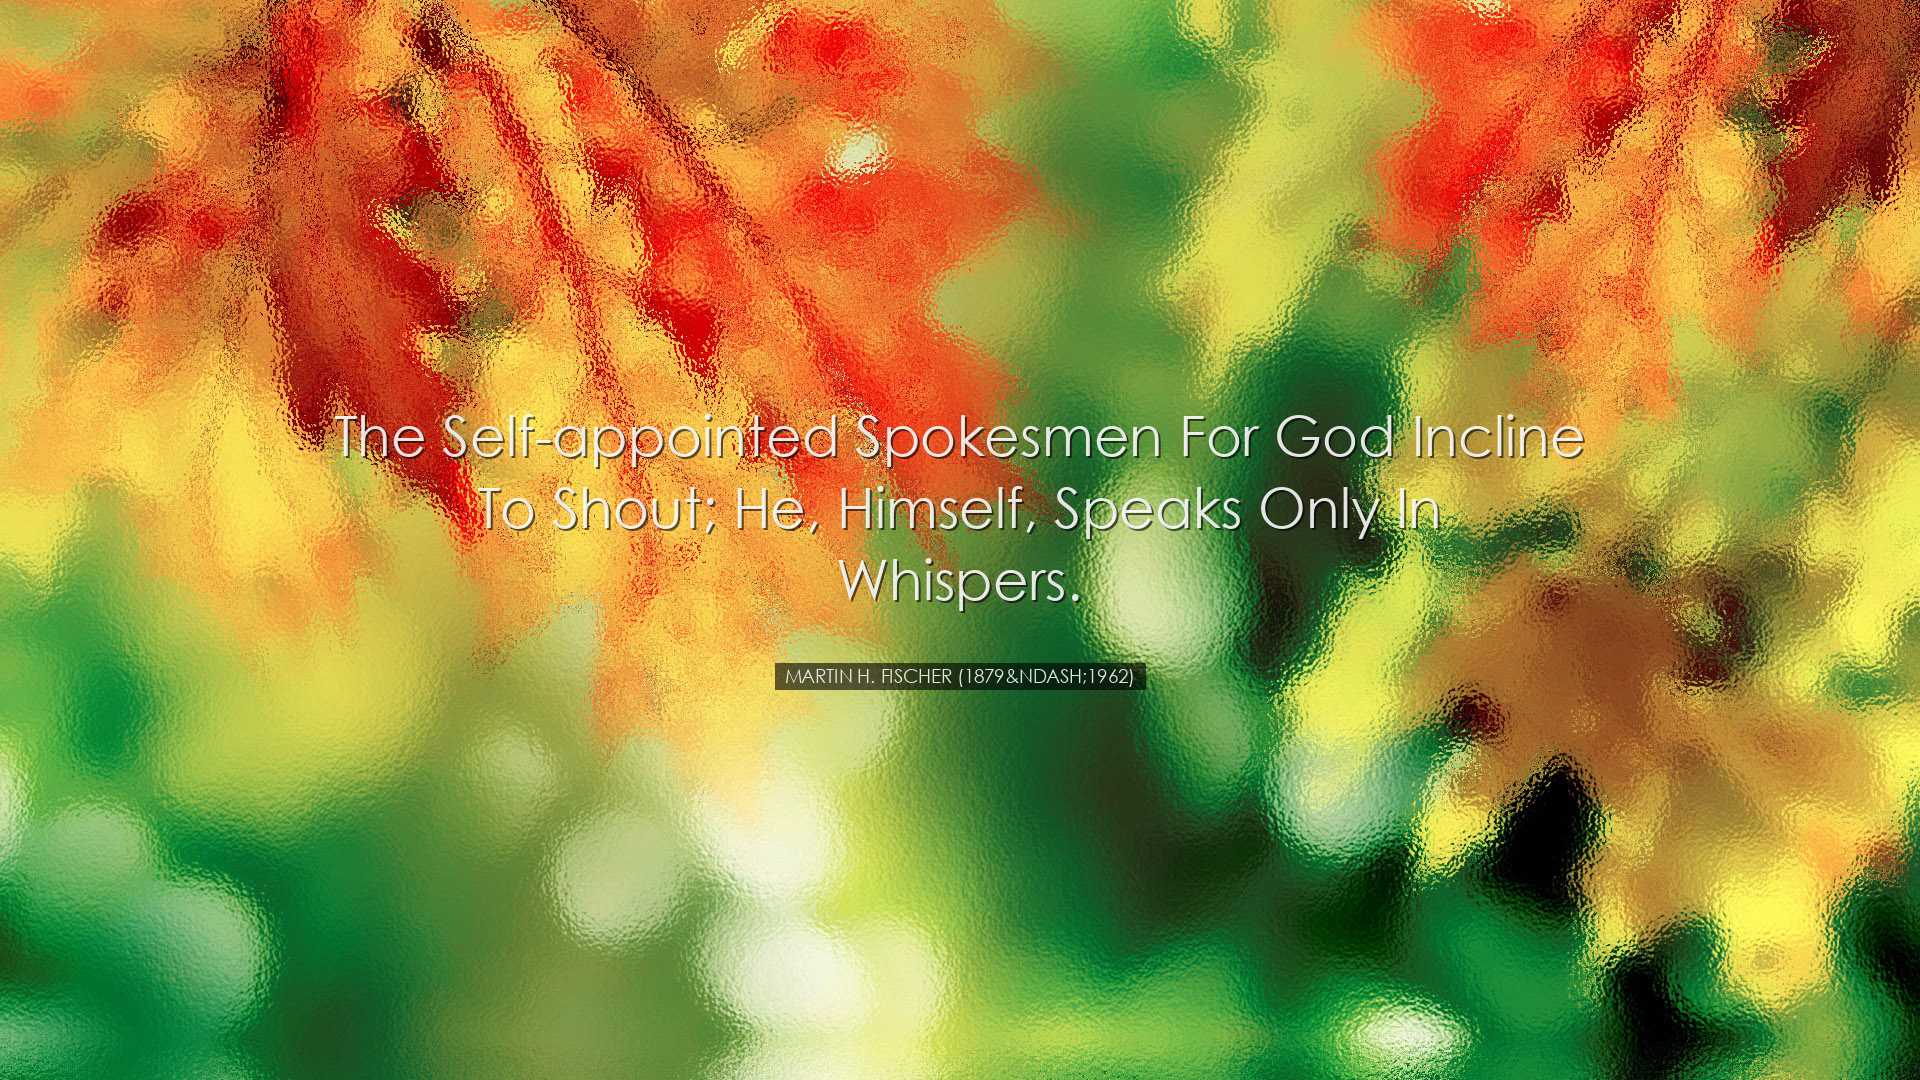 The self-appointed spokesmen for God incline to shout; He, Himself